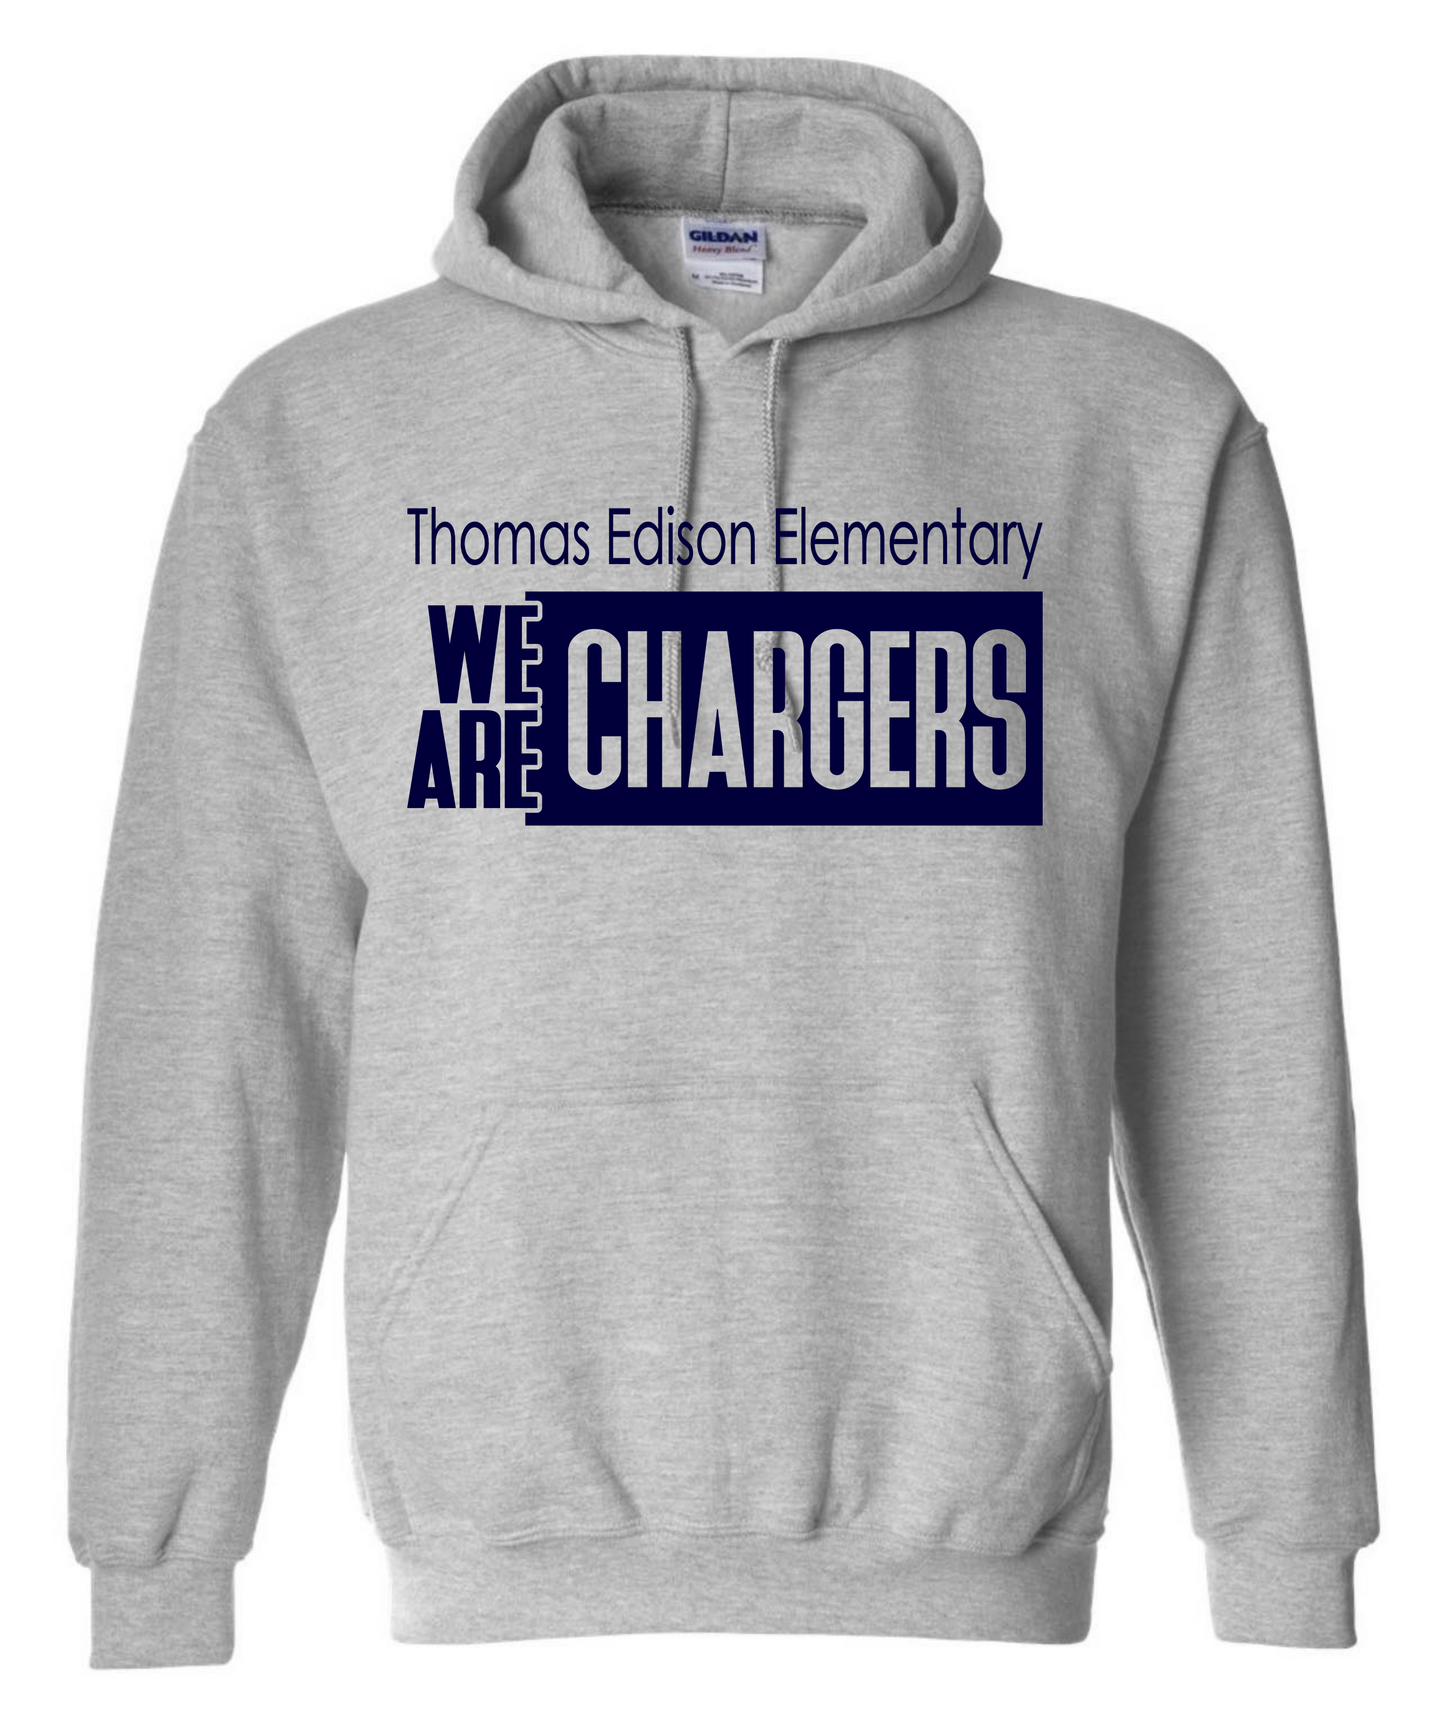 We Are Chargers Hoodie